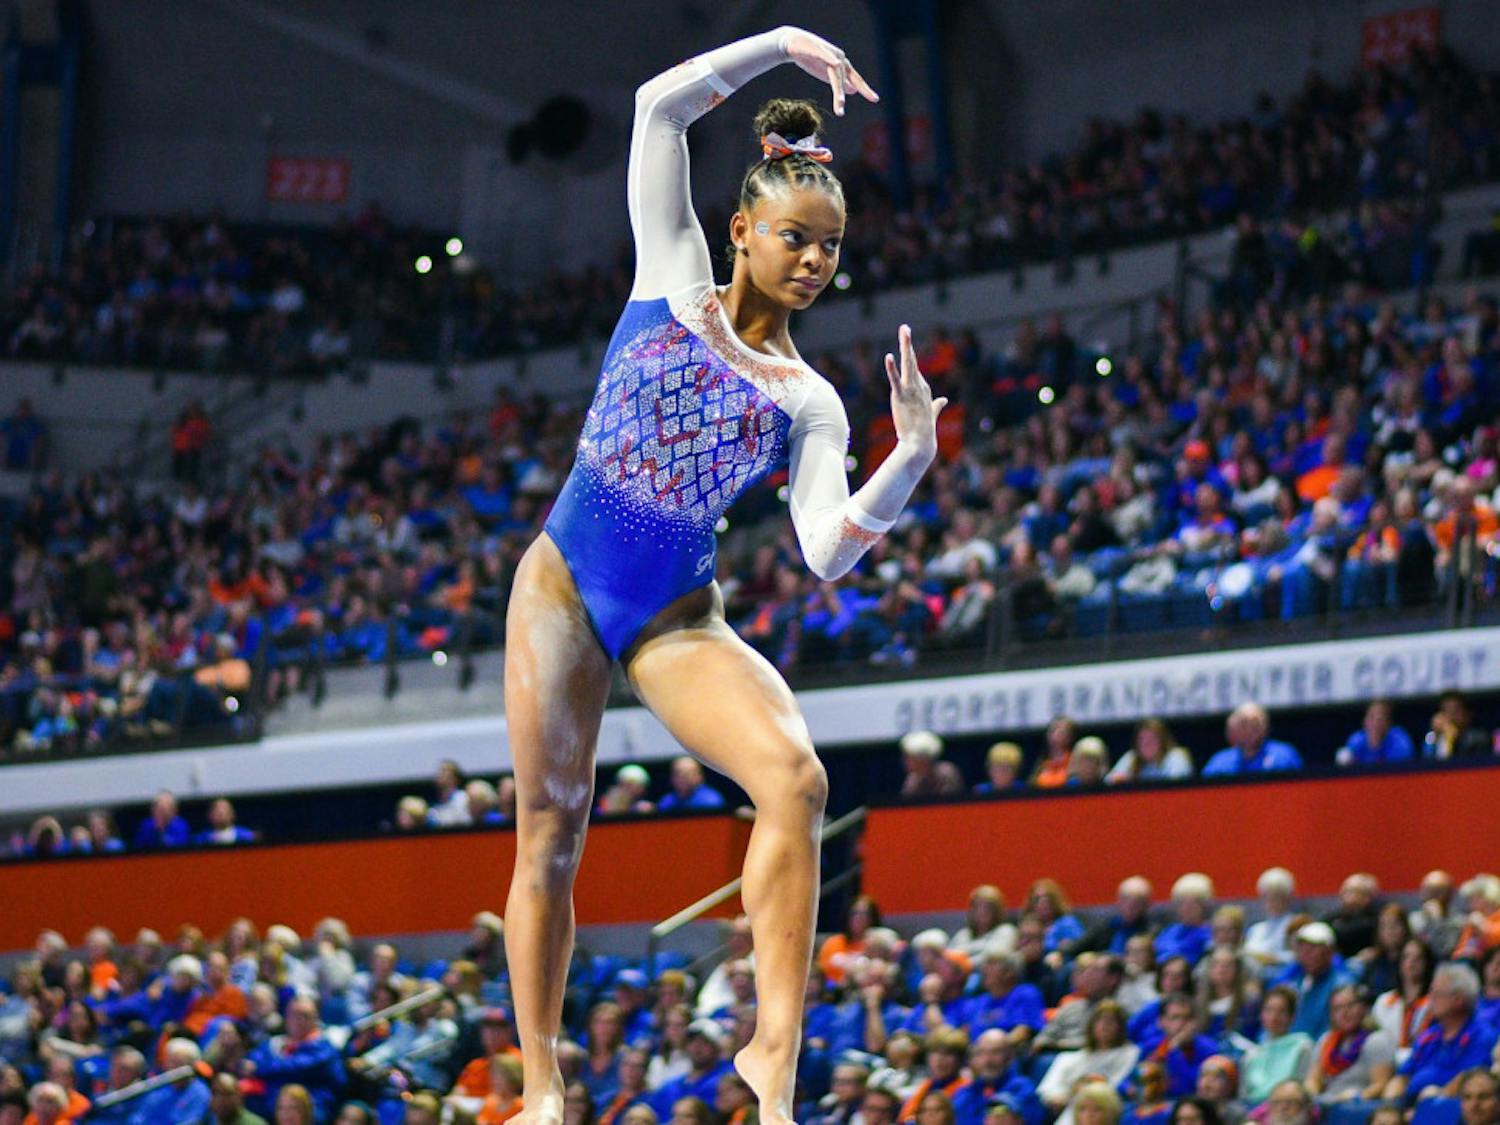 Florida freshman Trinity Thomas earned SEC Freshman of the Week for her performance during Florida’s 197.30-196.45 win over Missouri on Friday. Thomas scored a 9.950 on the uneven bars and a 9.900 on her floor routine, for which she finished third.
